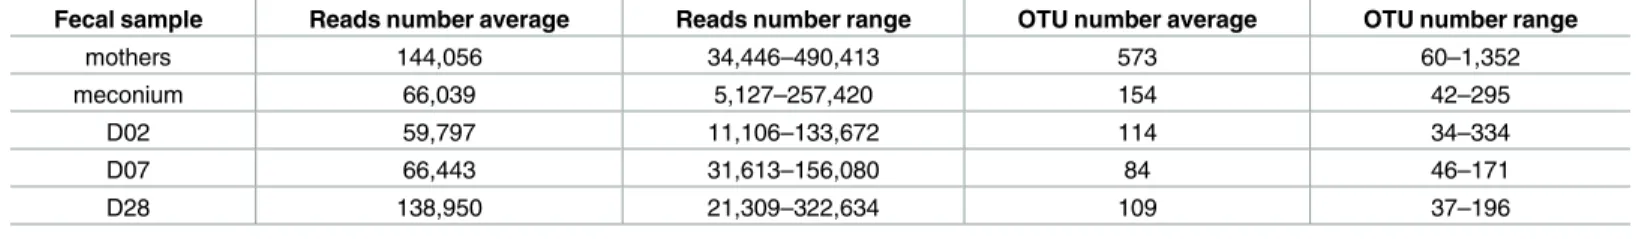 Table 2. Averages and ranges of the reads numbers and OTU numbers for mothers, meconium, D02, D07 and D28.